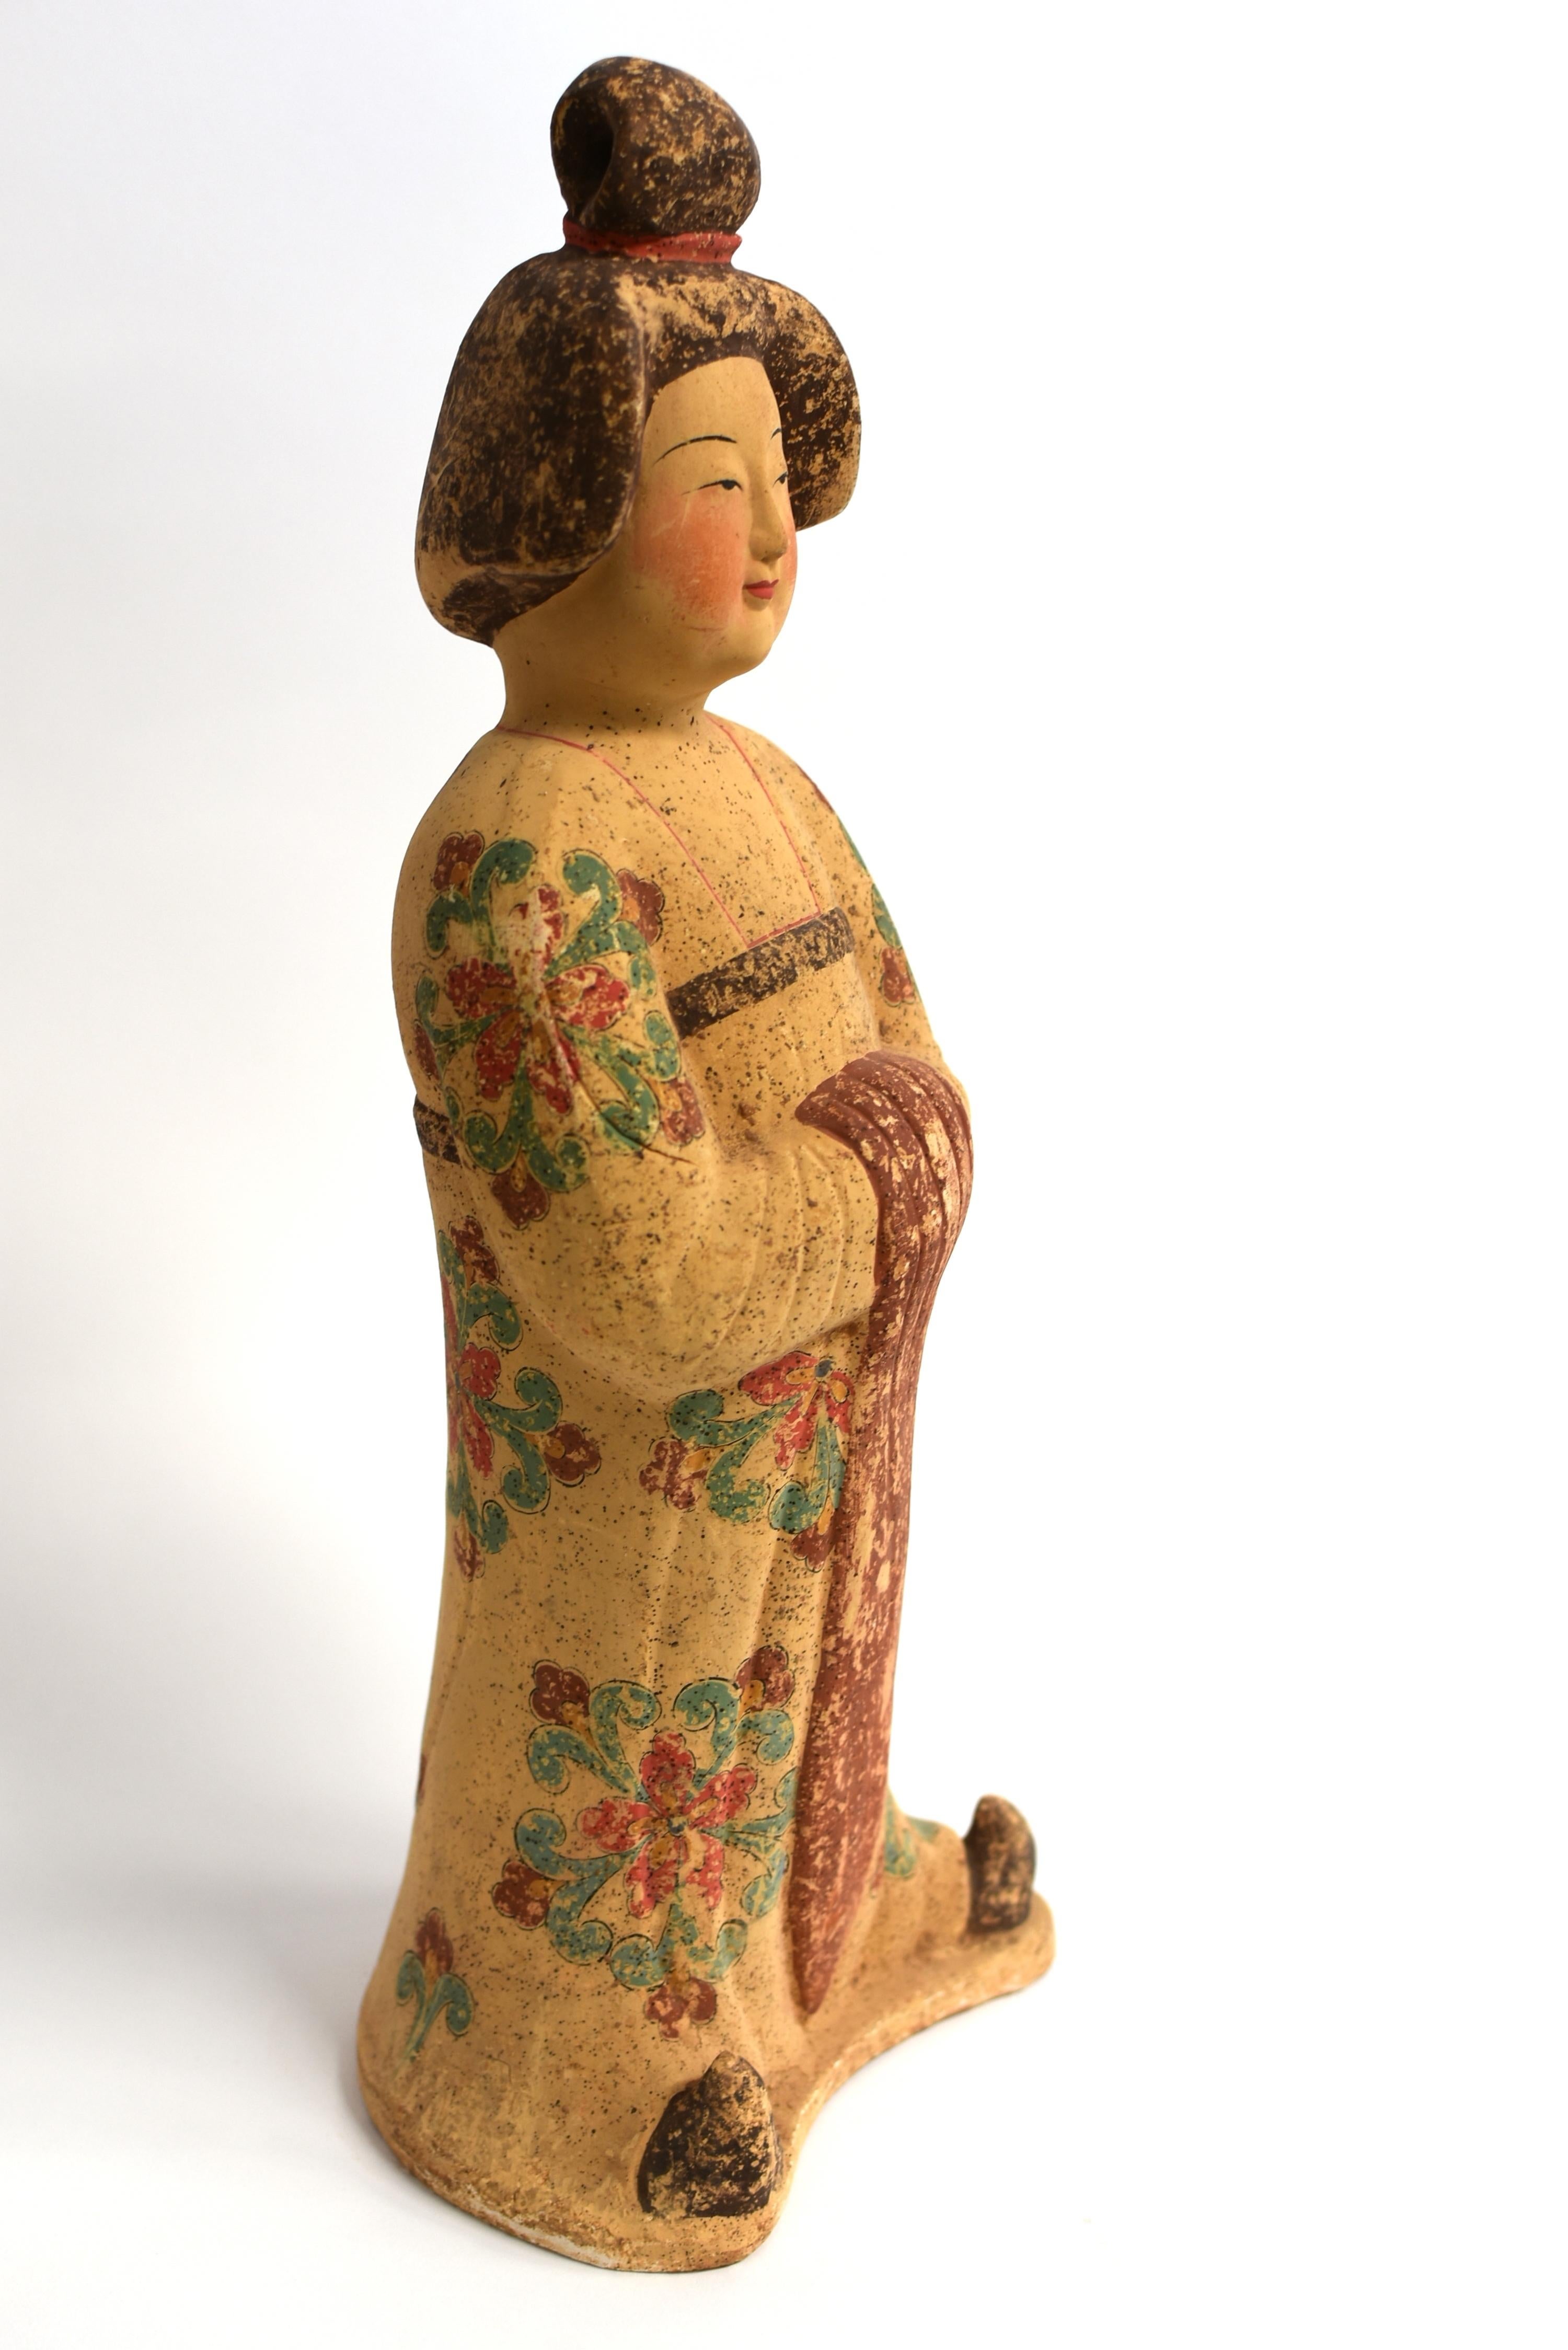 A beautiful hand painted pottery figure of a court lady. The young girl stands with her head tilted slightly to her left. Her face modeled with full, rosy cheeks and delicate features in a small mouth with cherry colored lips and long thin